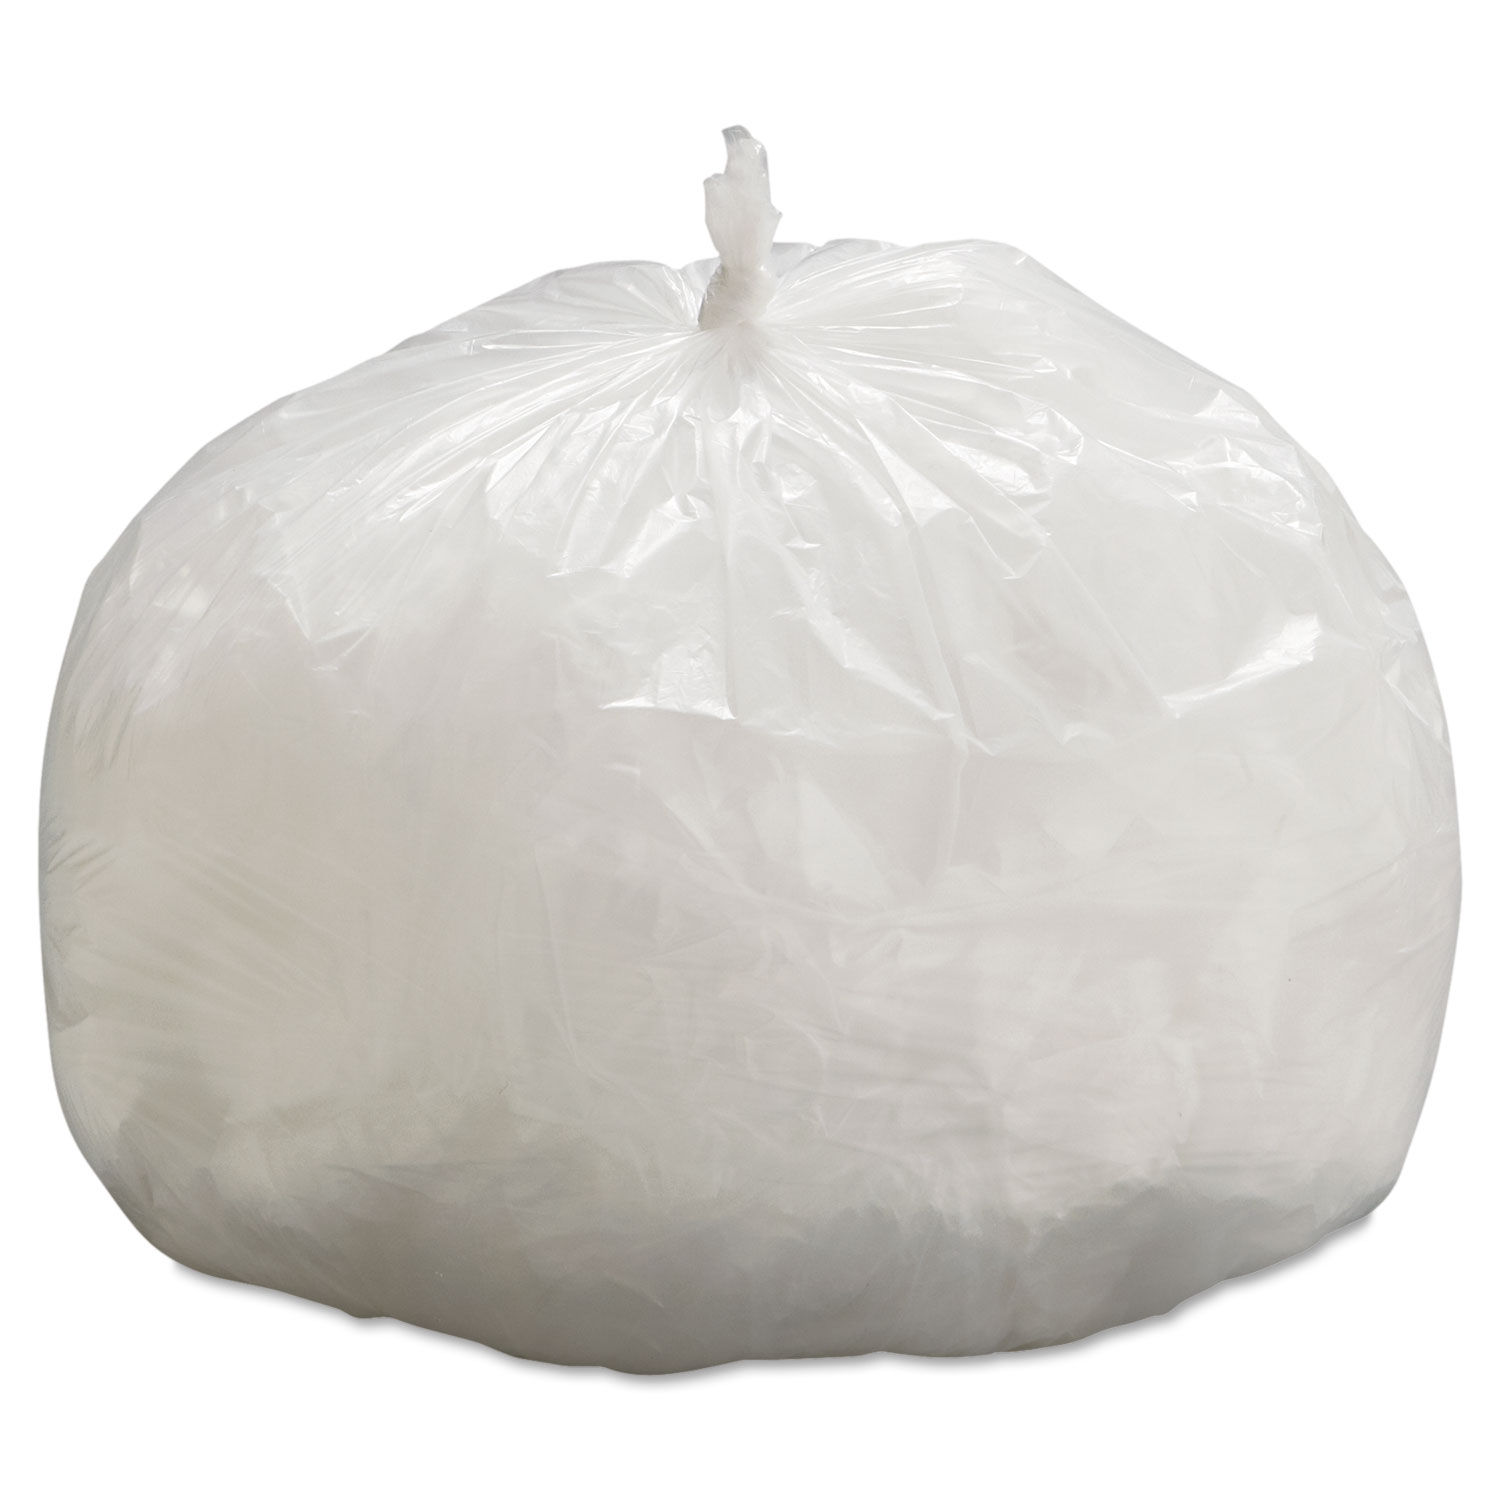 High-Density Can Liners 33 gal, 9 microns, 33" x 39", Natural, 25 Bags/Roll, 20 Rolls/Carton